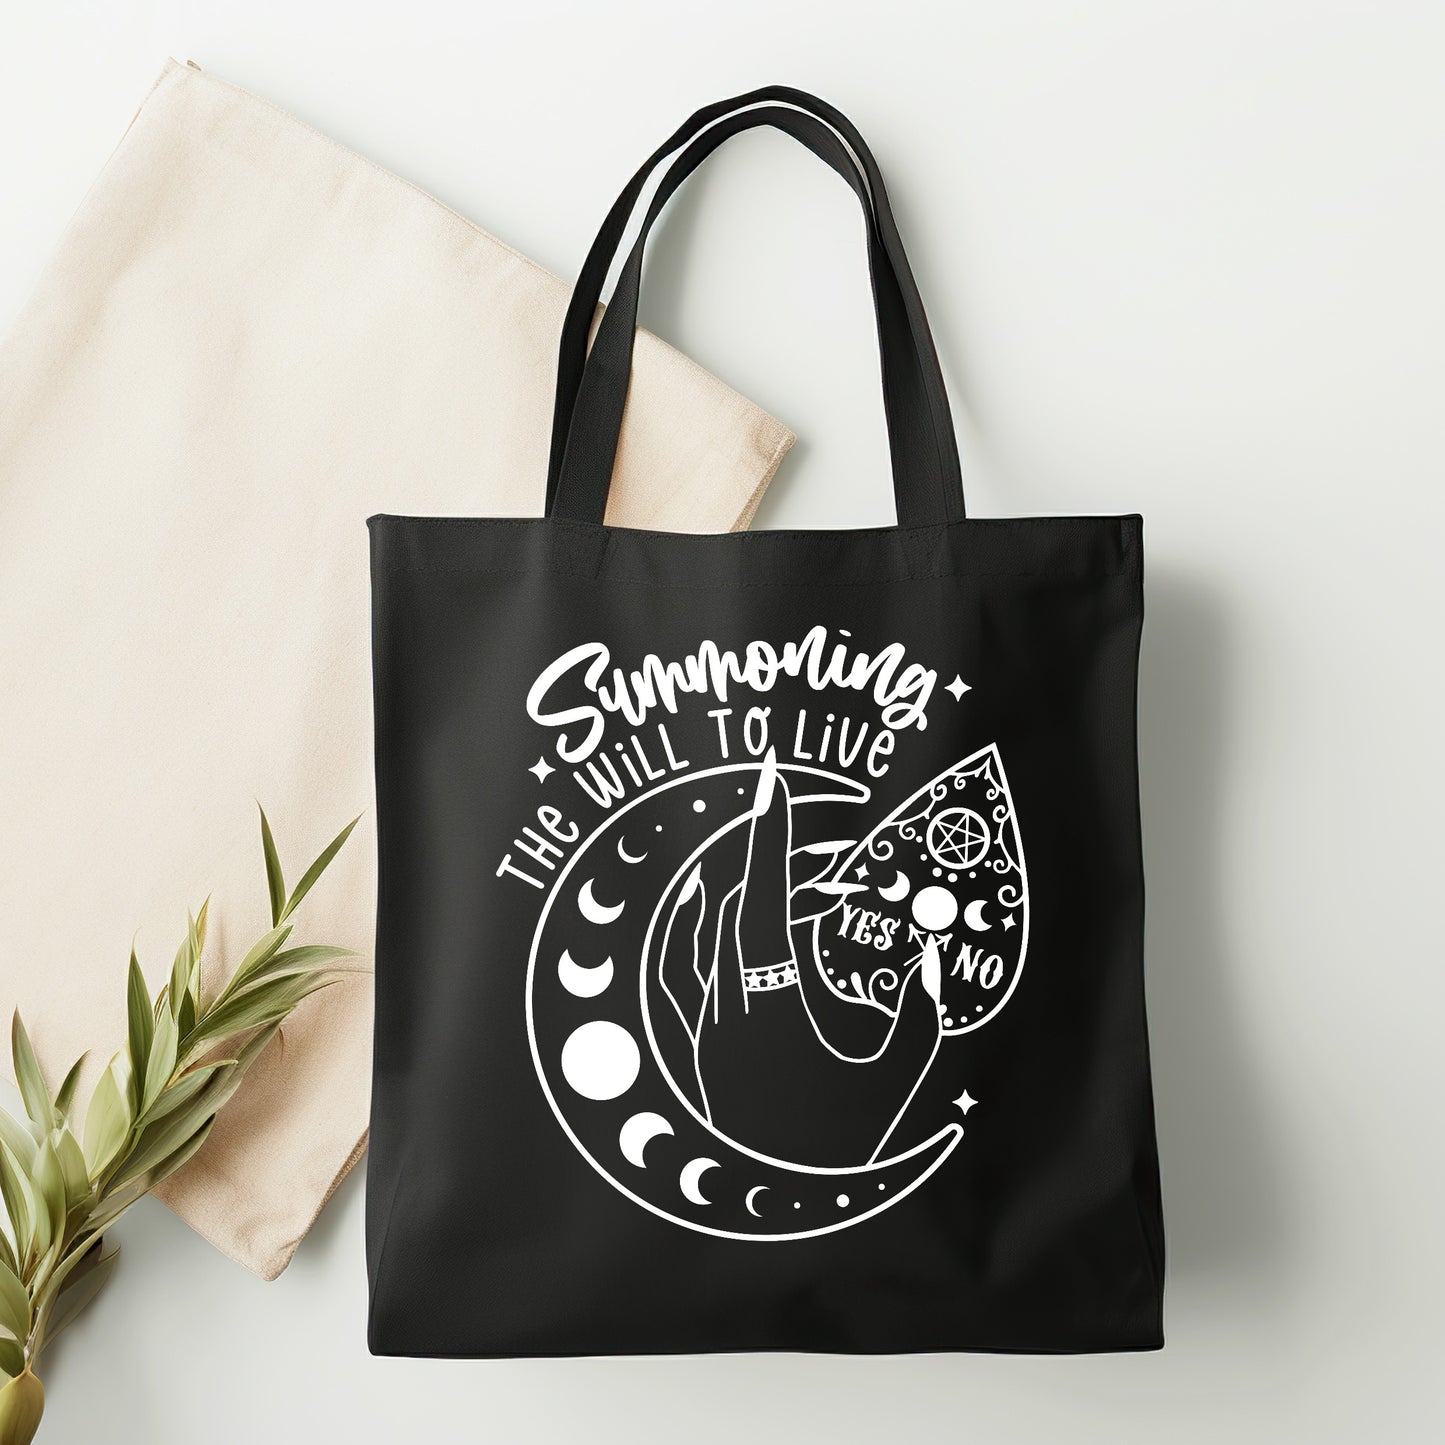 Summoning the will to live tote bag